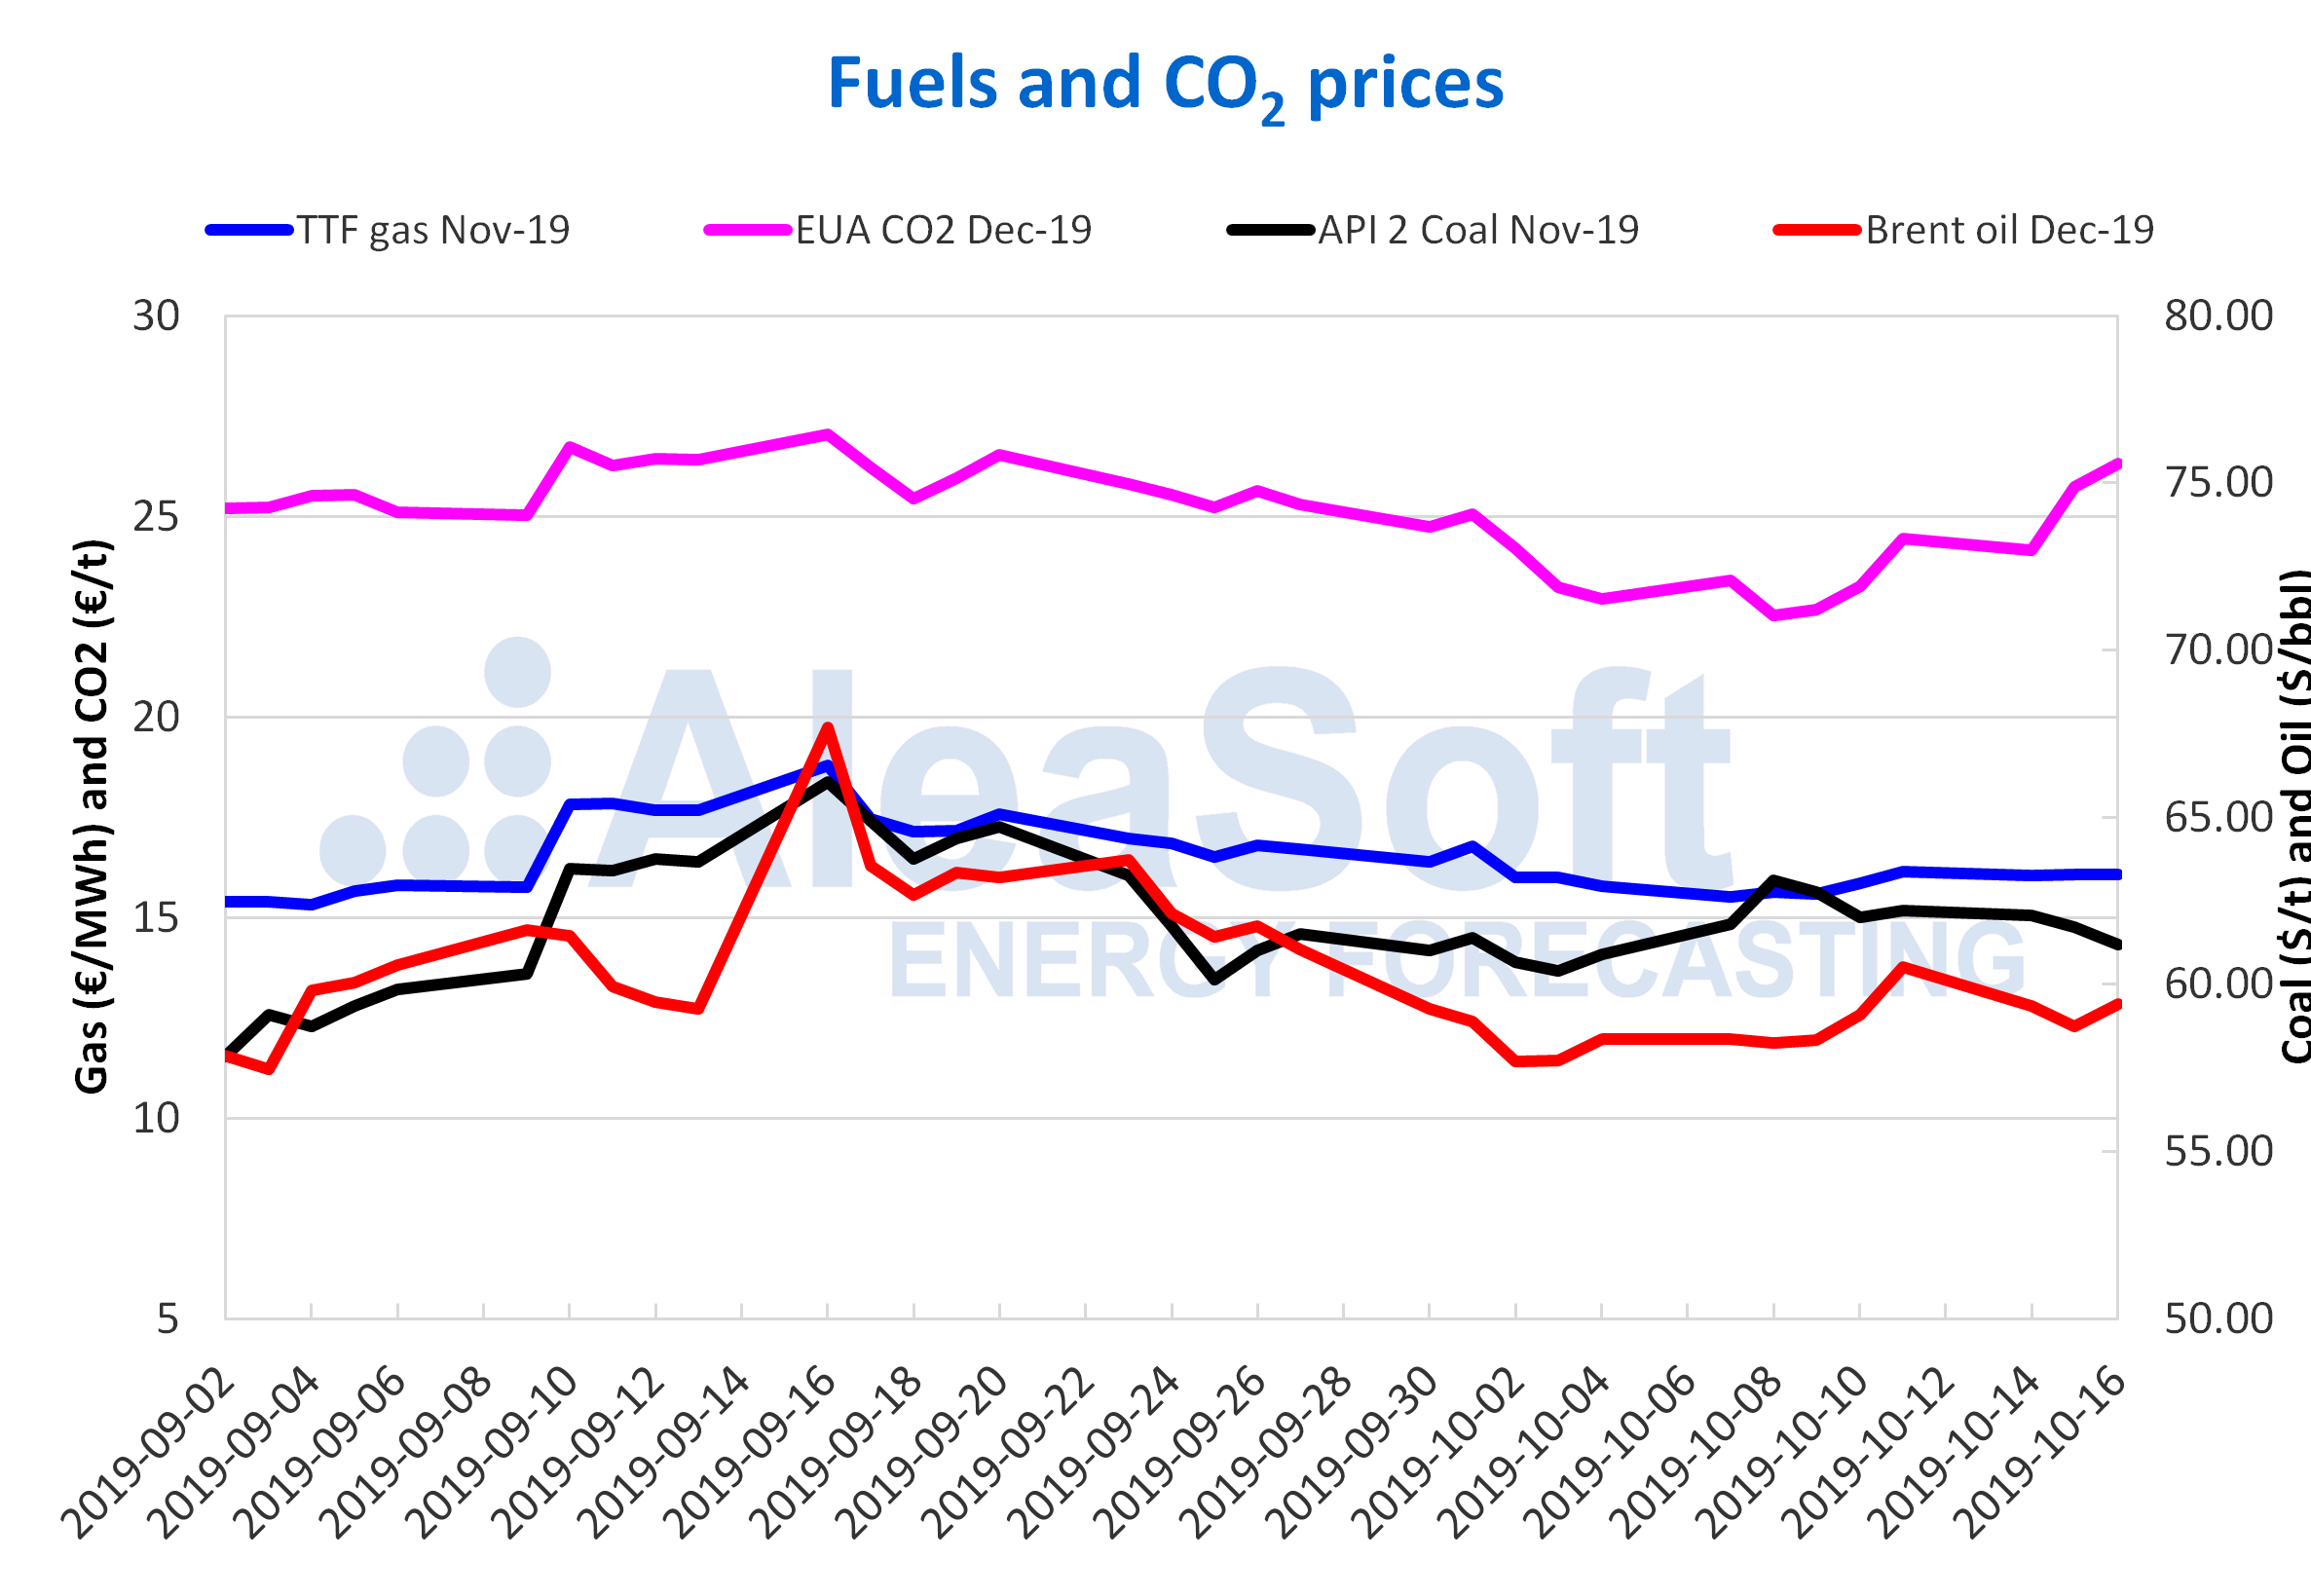 AleaSoft - Prices gas coal brent oil co2